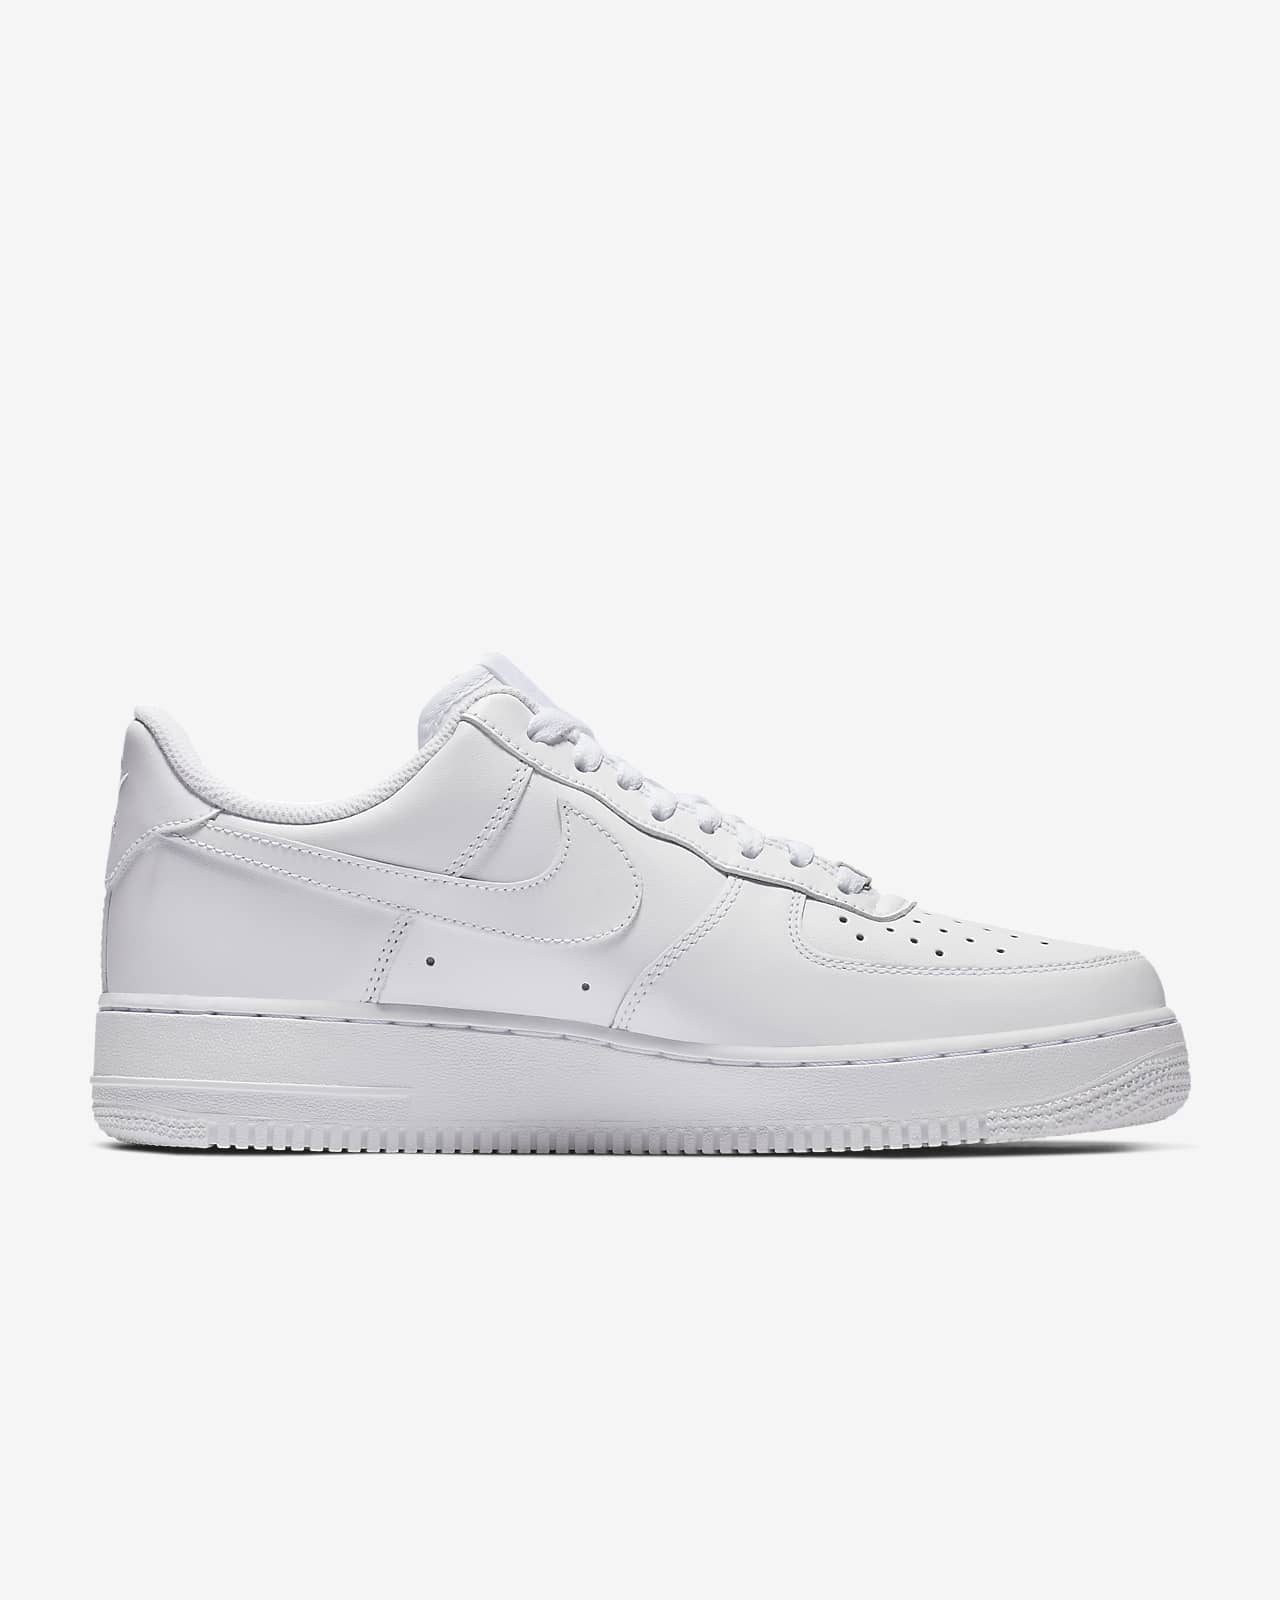 nike air force 1 07 women's white size 8